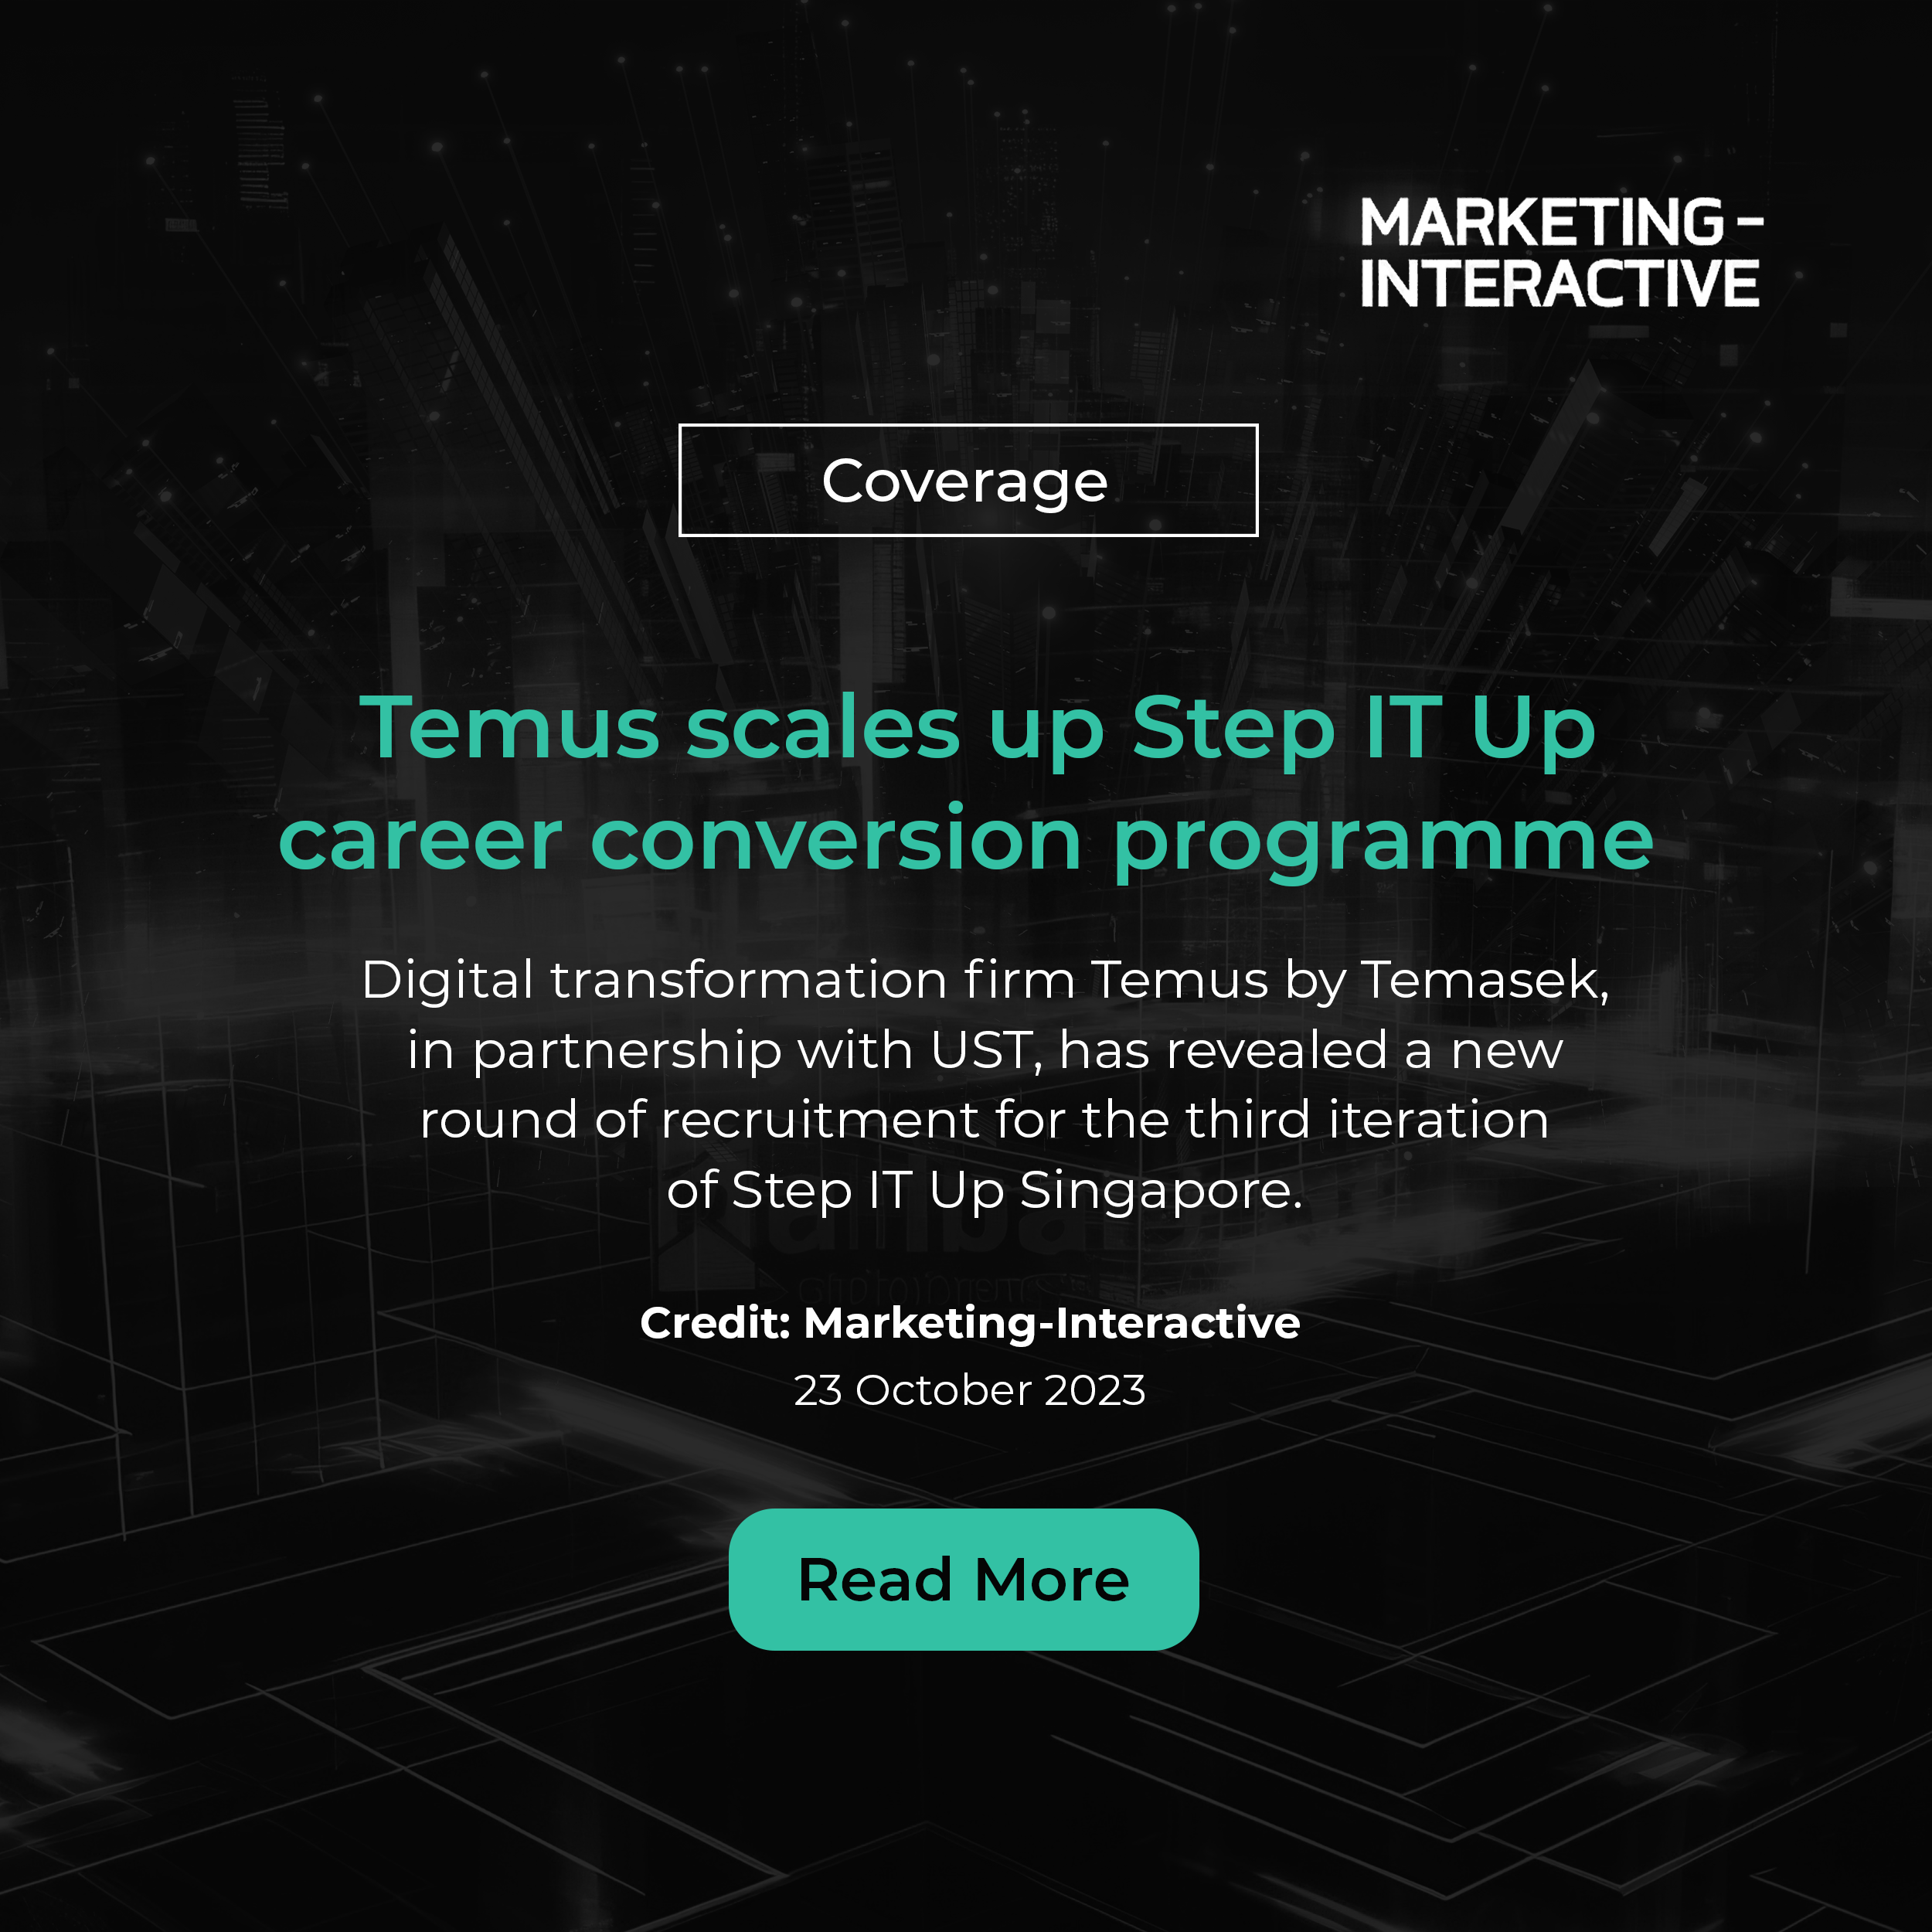 Coverage: Temus scales up Step IT Up career conversion programme